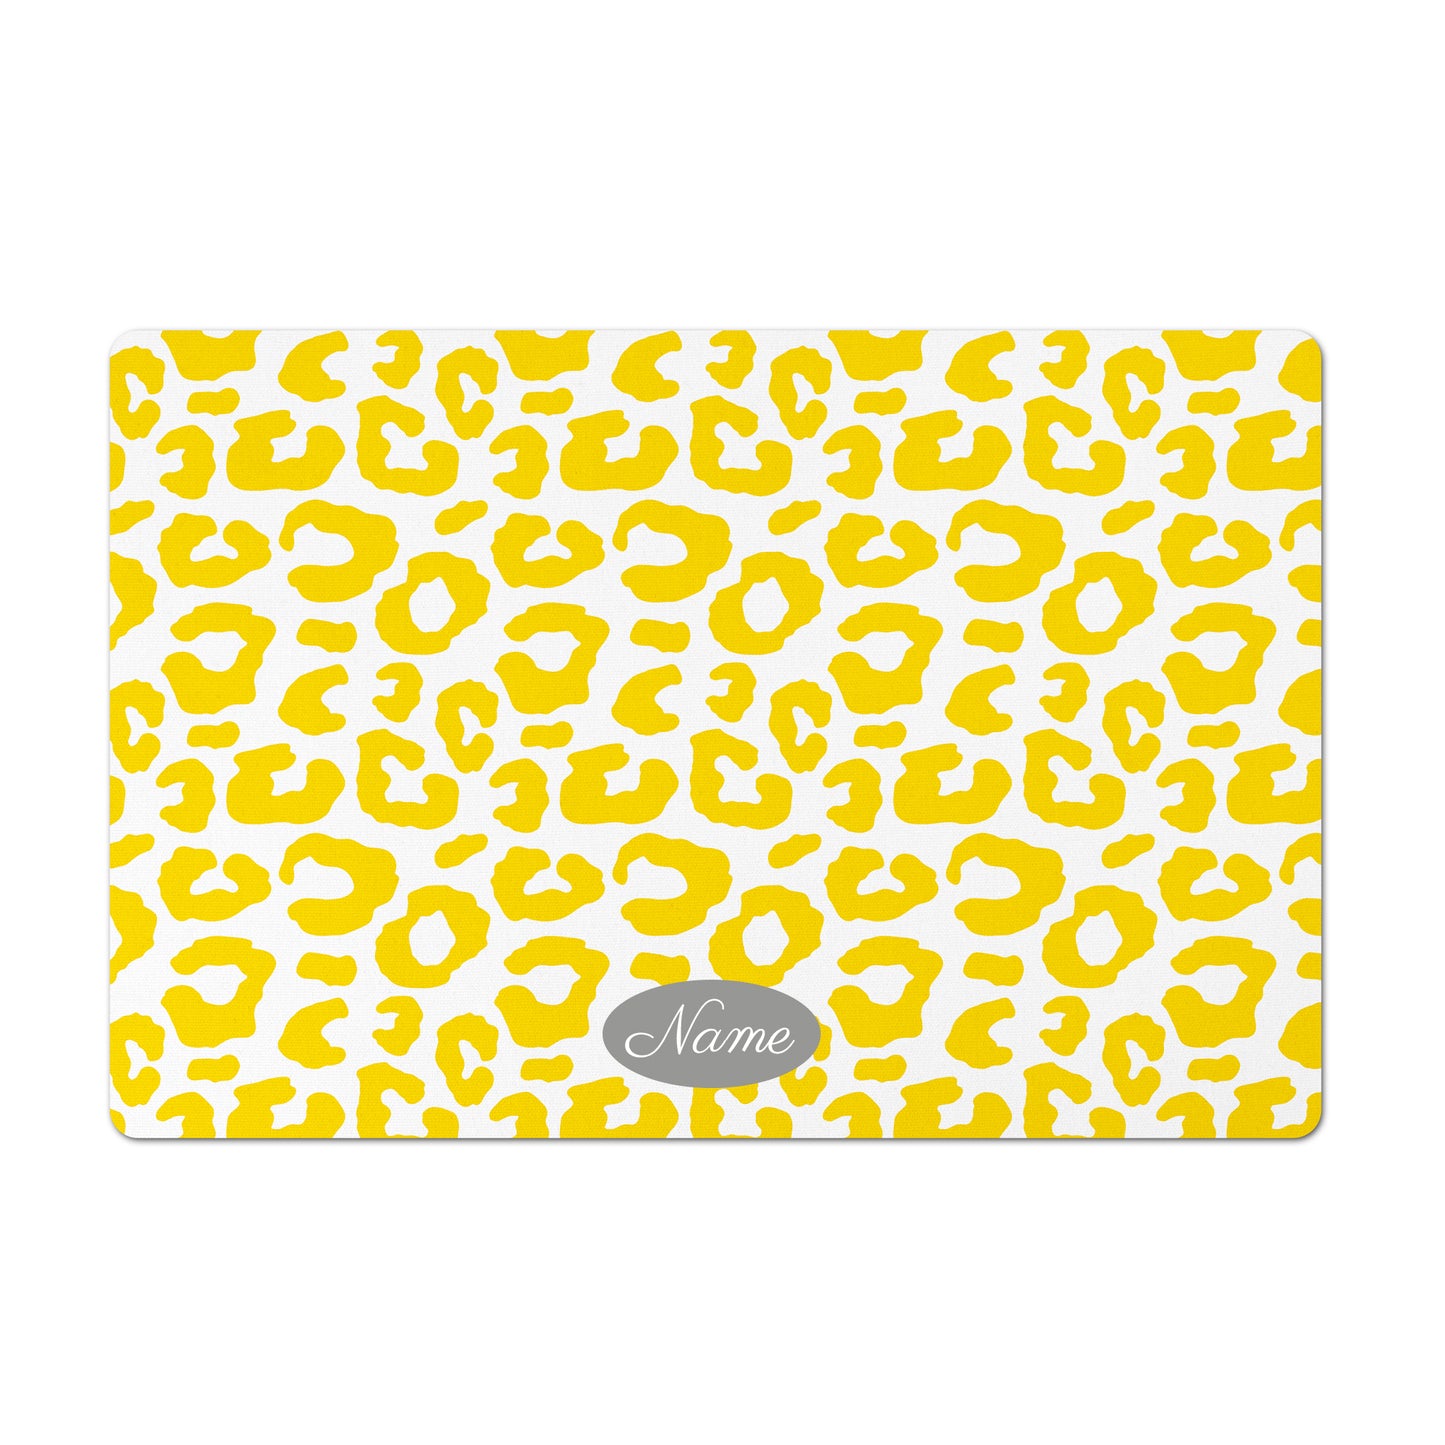 Personalized Leopard Pet Bowl Mat, Golden Yellow and White